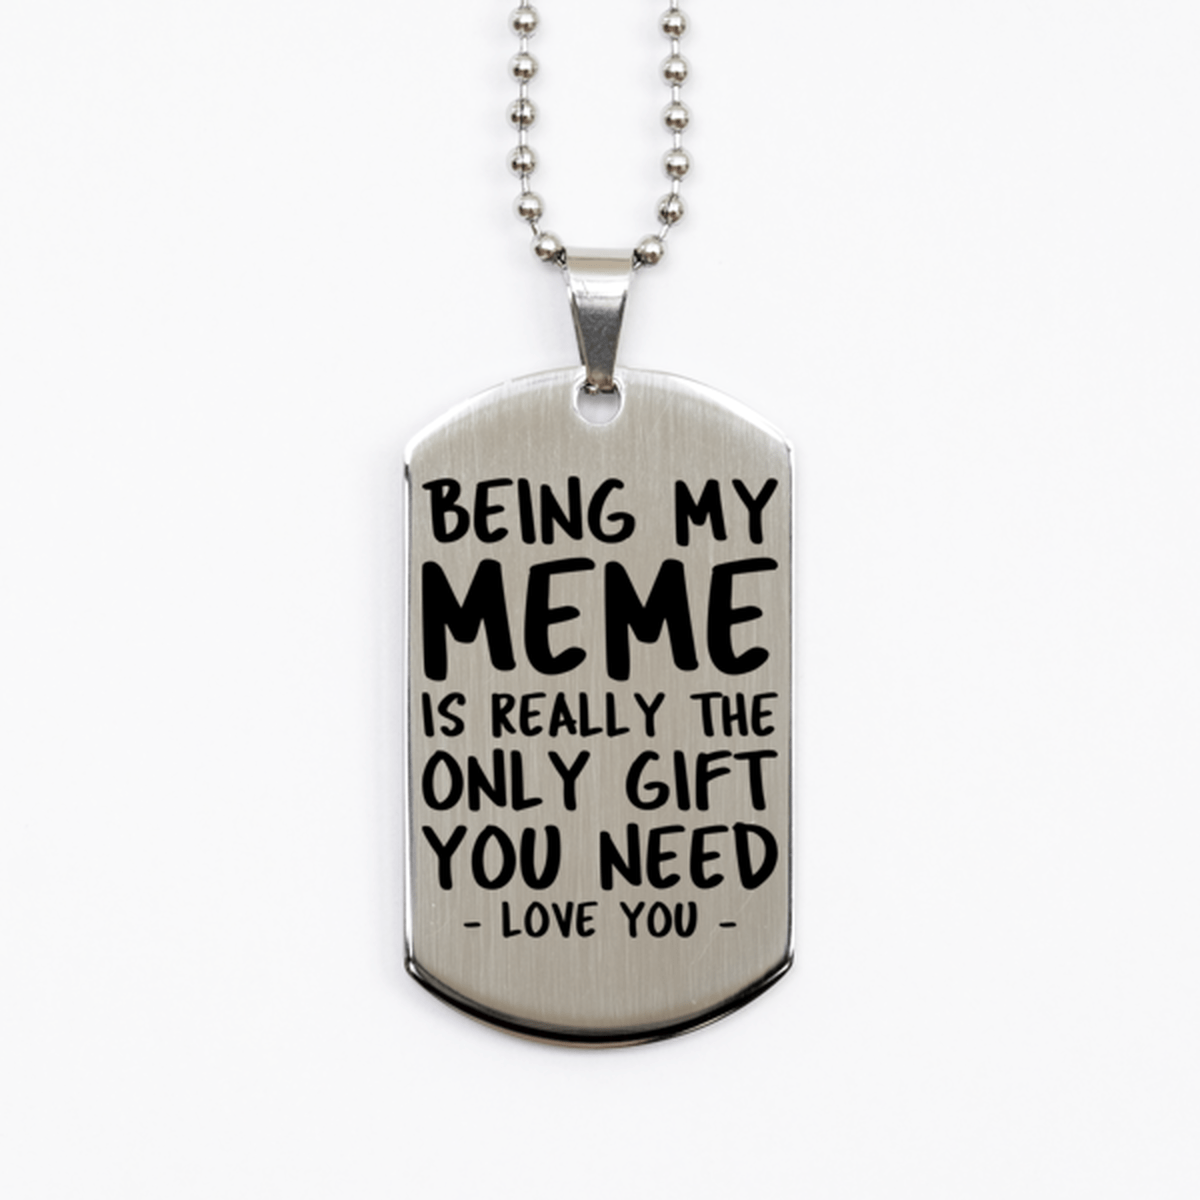 Funny Meme Silver Dog Tag Necklace, Being My Meme Is Really the Only Gift You Need, Best Birthday Gifts for Meme